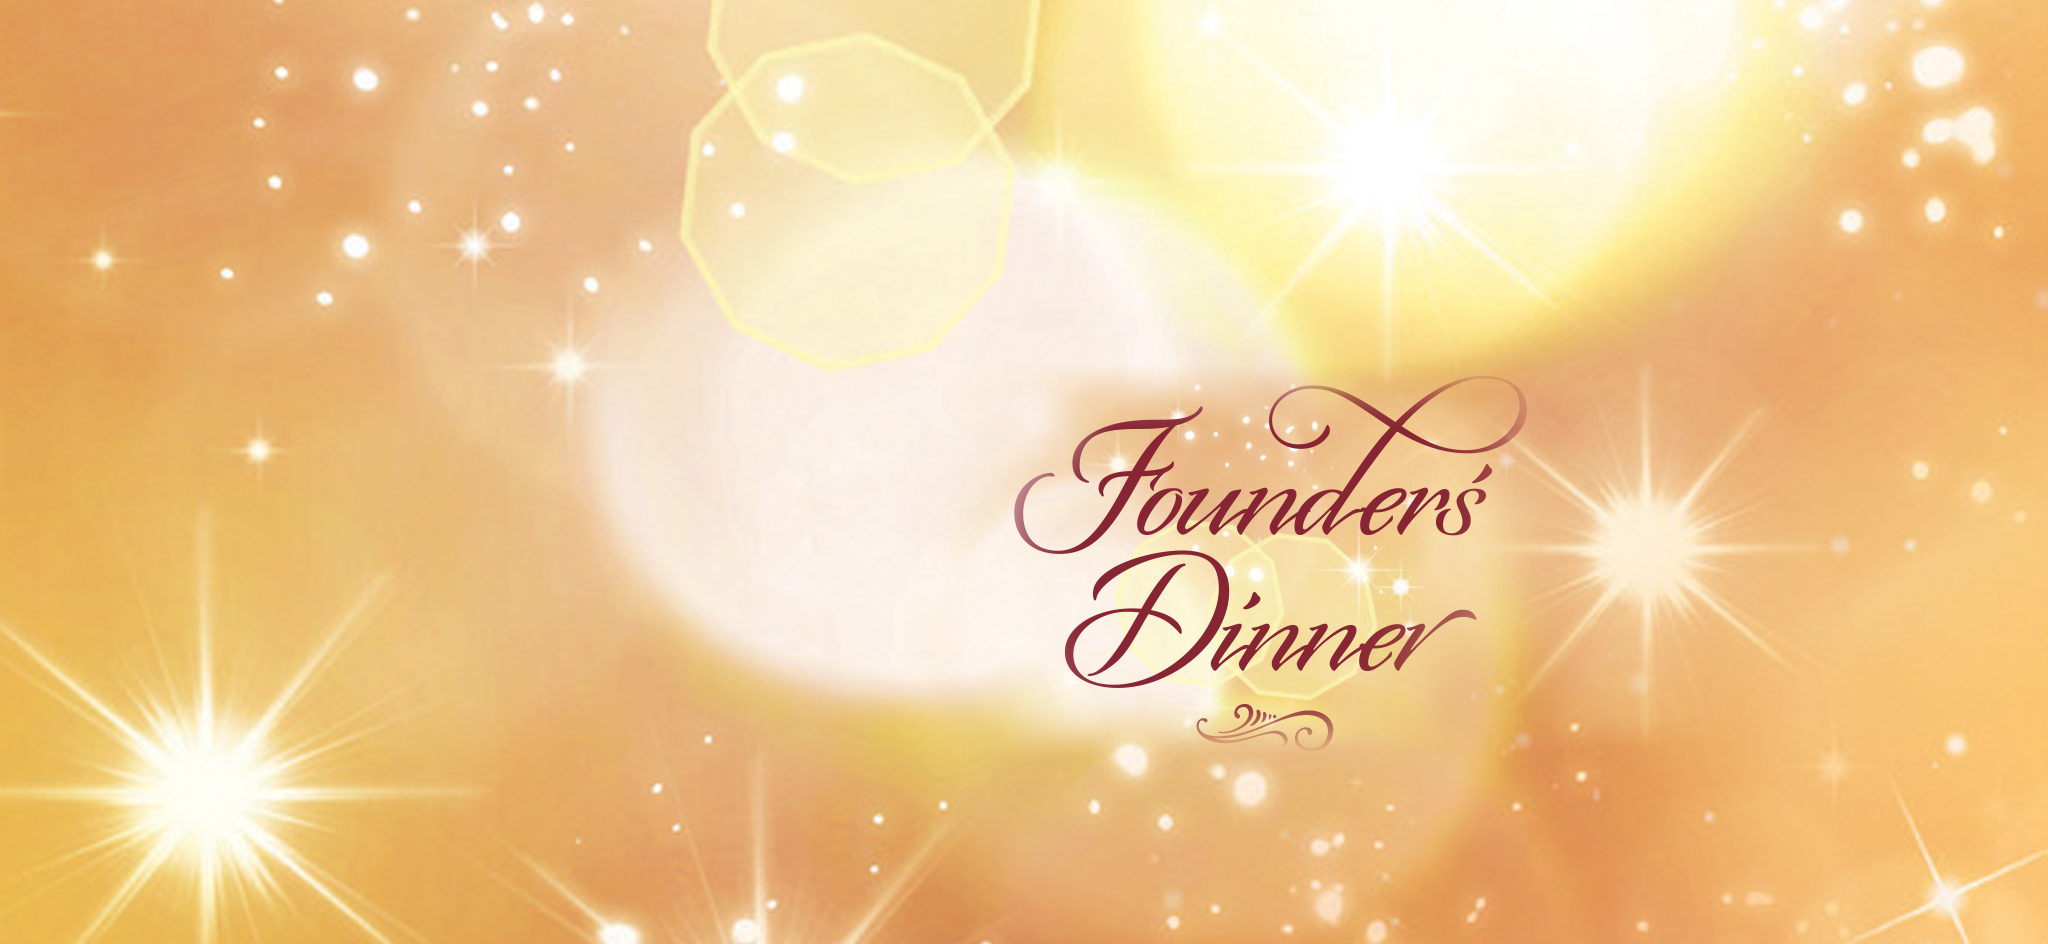 Join us or become a sponsor for our Founder's Dinner benefitting student scholarships »